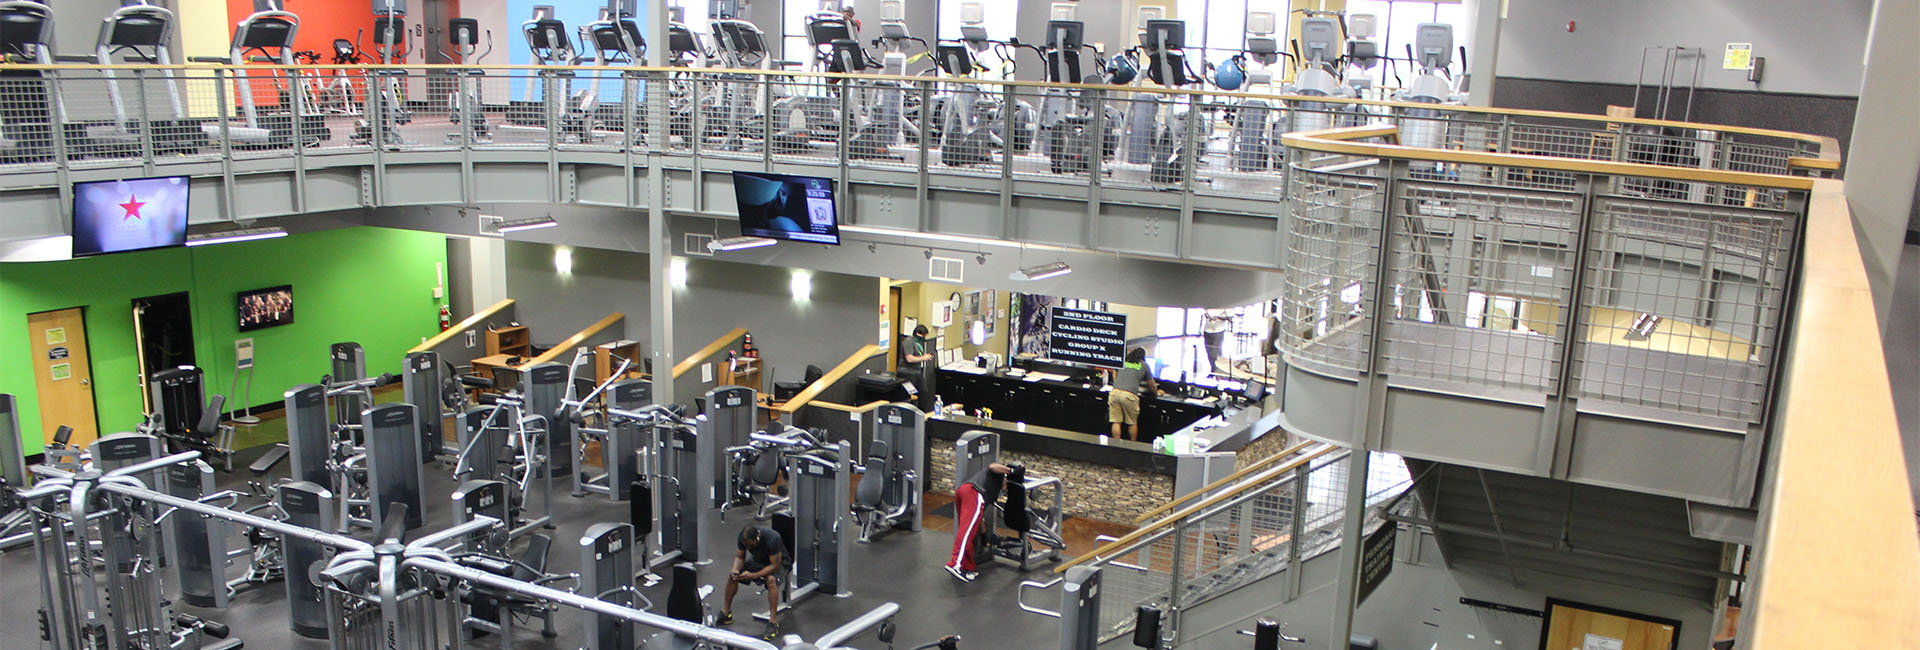 large and spacious two story gym with modern equipment